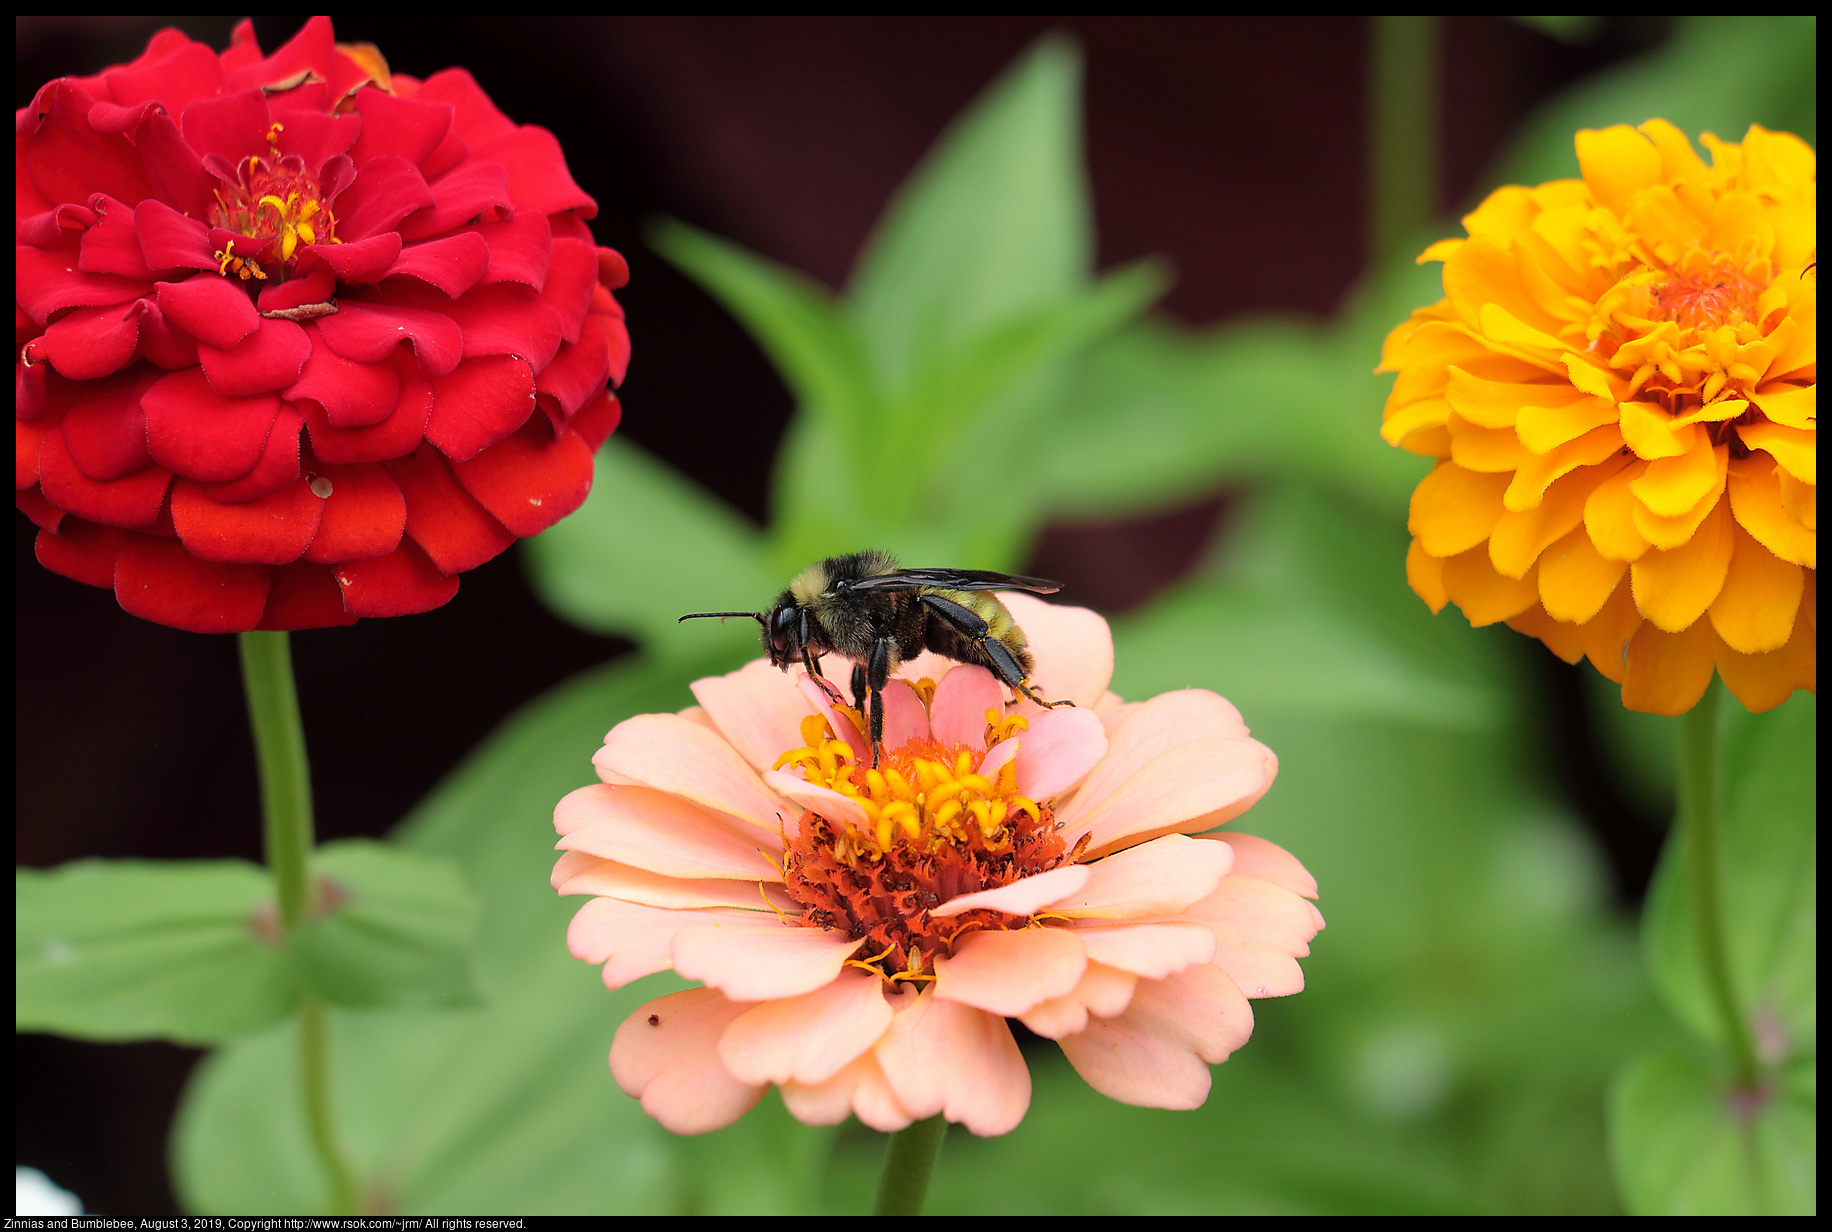 Zinnias and Bumblebee, August 3, 2019